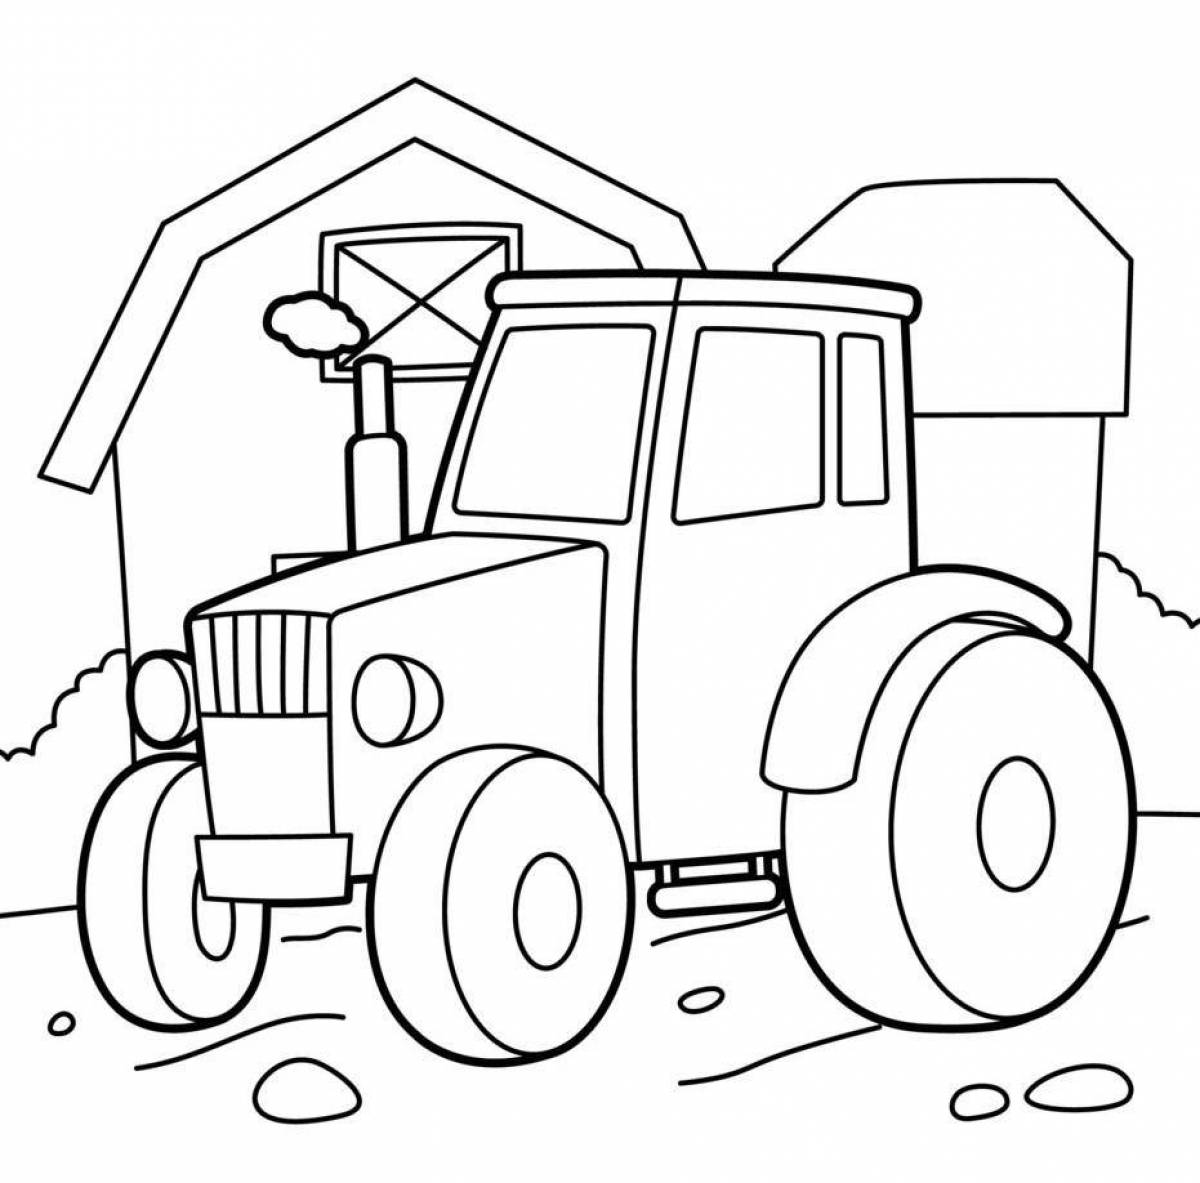 Exciting tractor with trailer coloring book